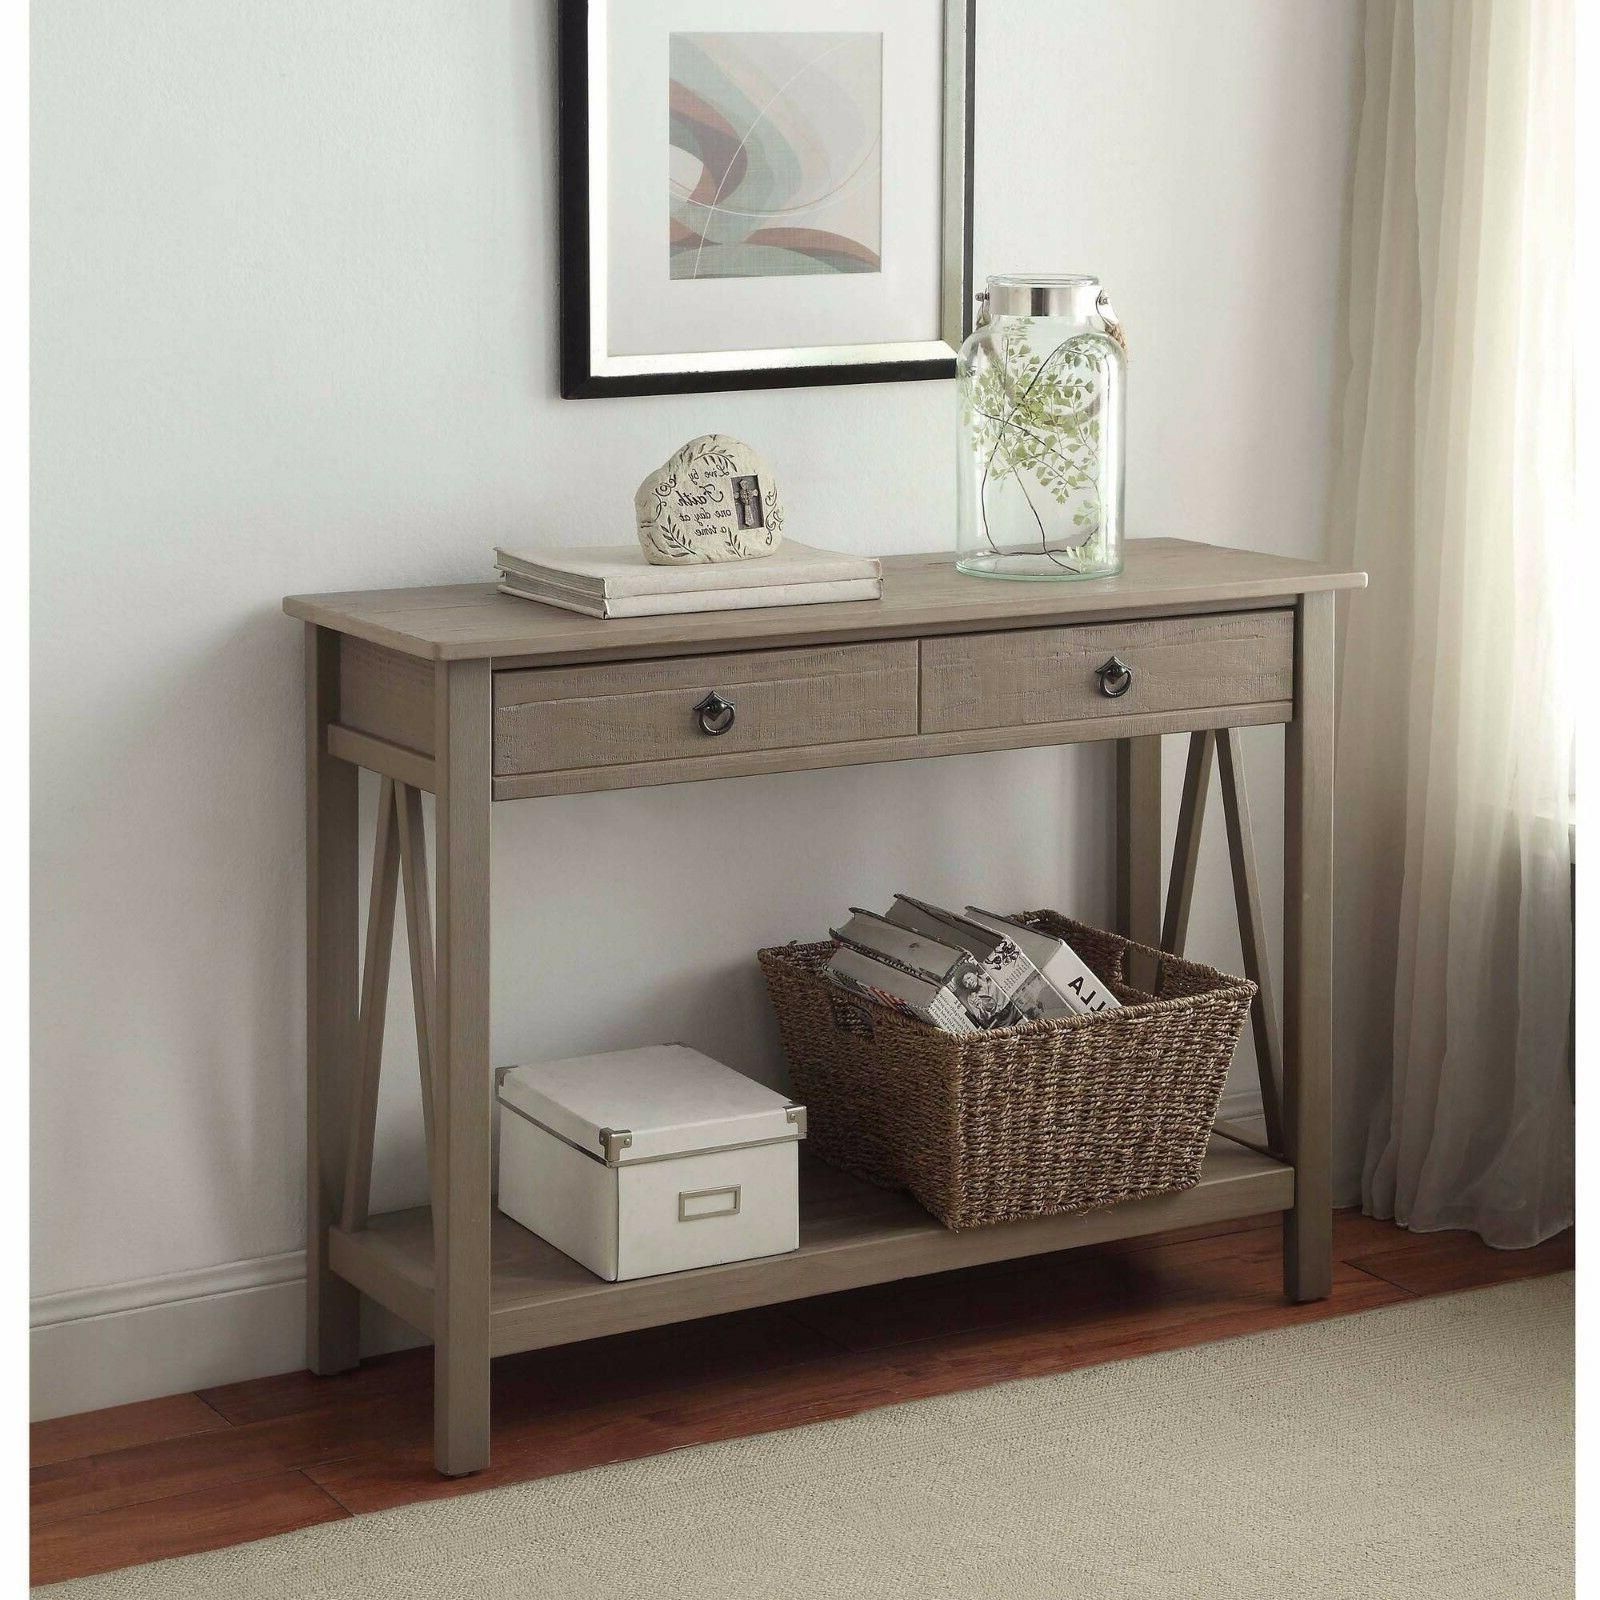 Console Table In Rustic Woodgrain Gray Finish Sof In Vintage Gray Oak Console Tables (View 13 of 20)